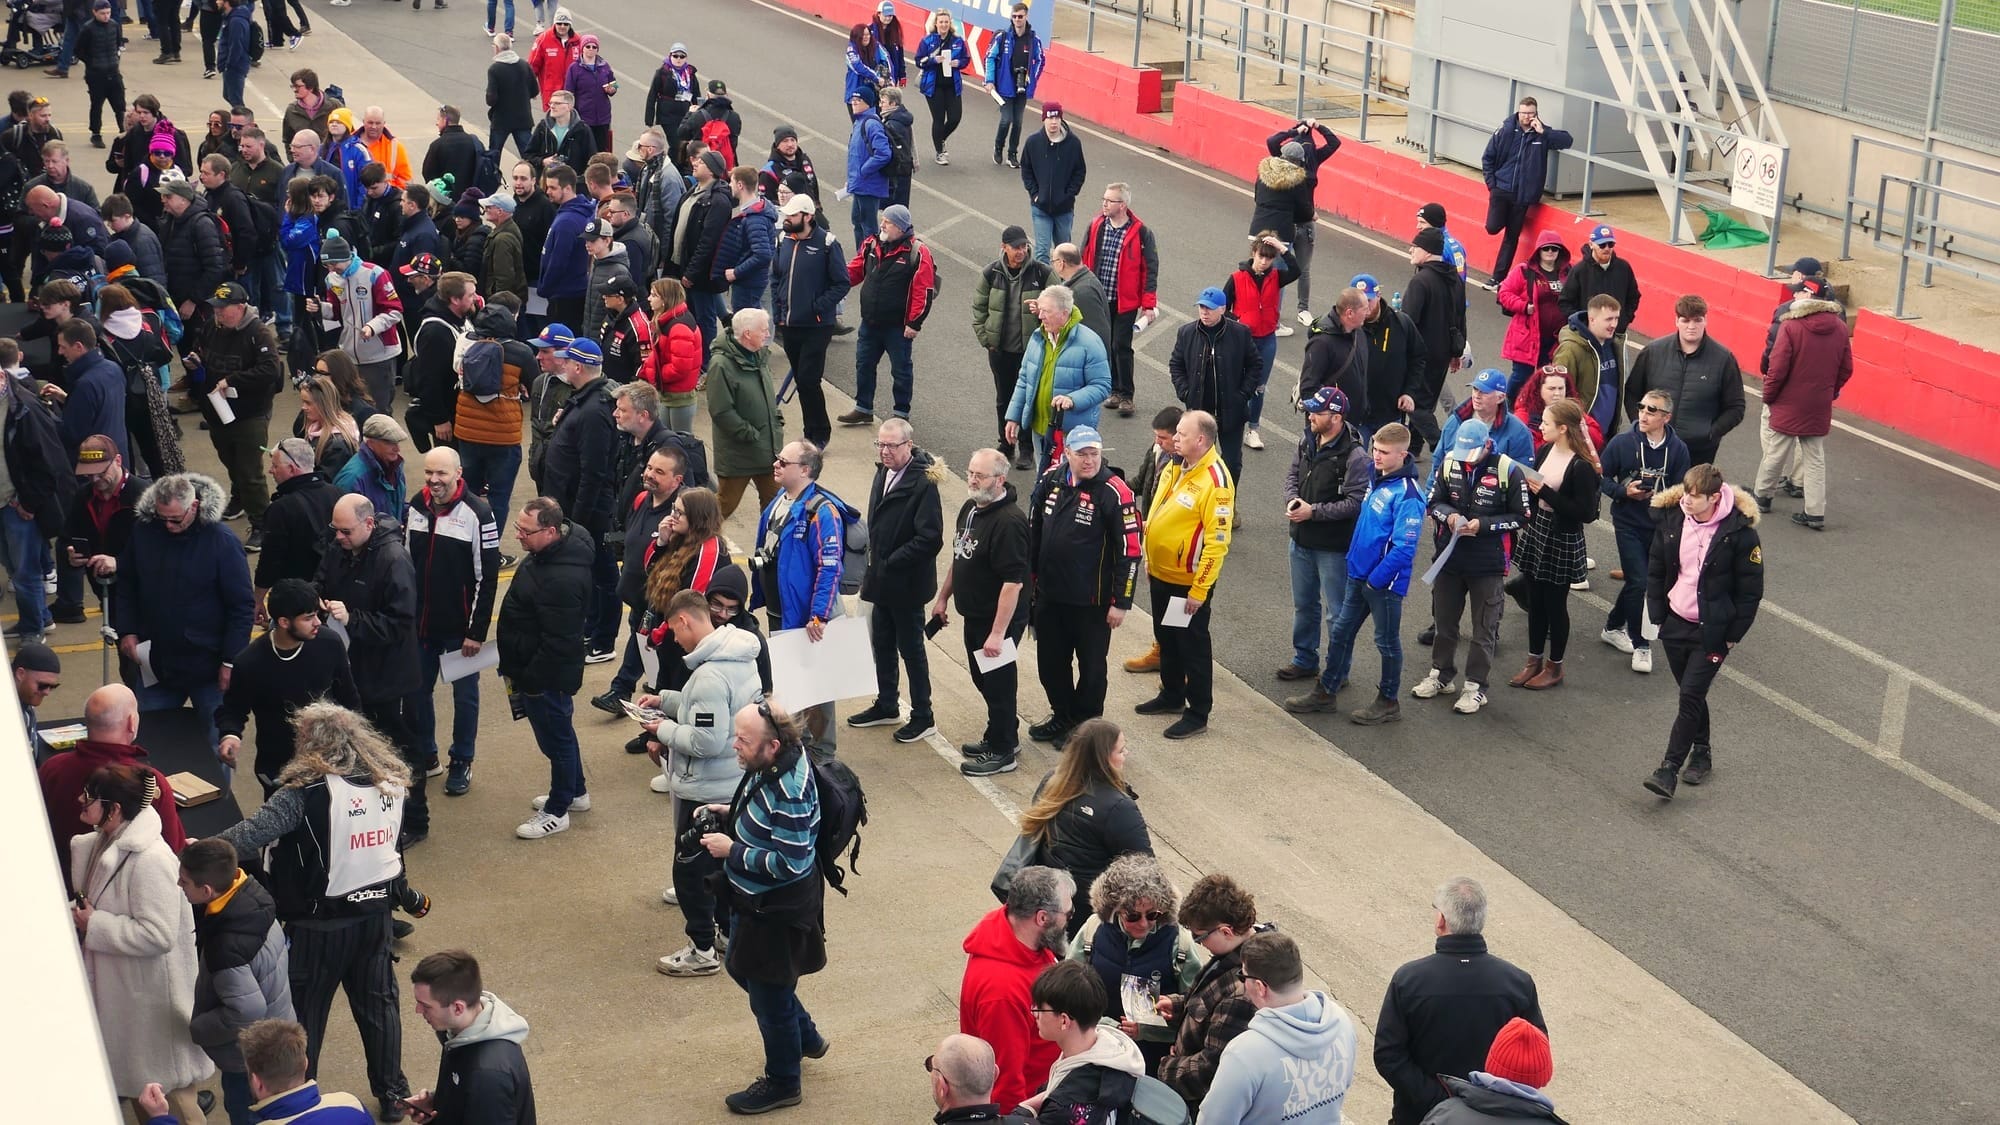 "Revving Up" for an Exciting New Season: BTCC Fans Gear Up for a Thrilling Championship Ahead!